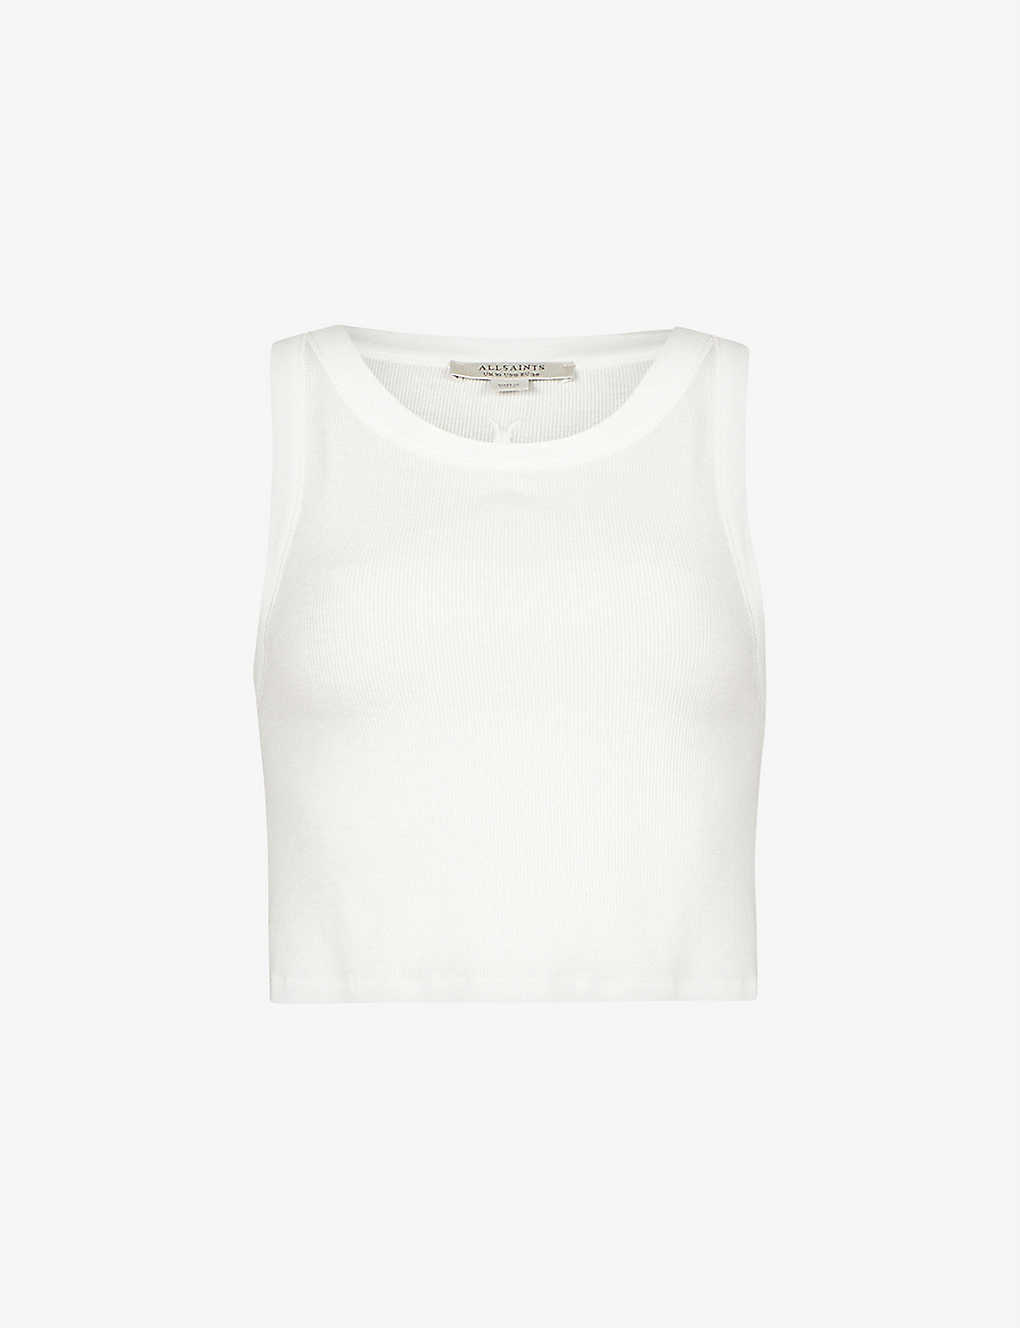 Allsaints Rina Cropped Woven Top In Optic White